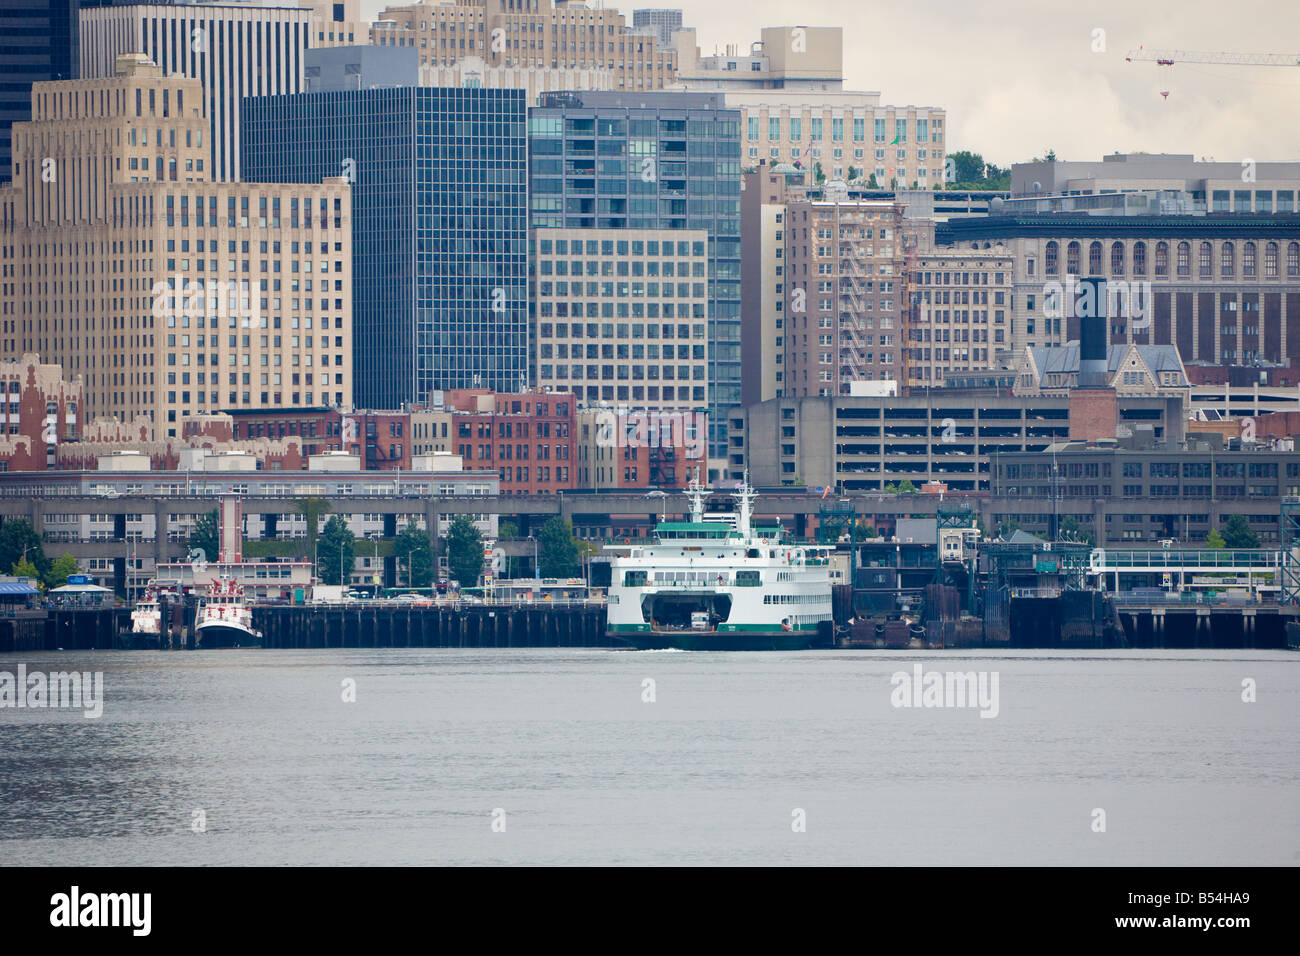 Ferry boat at dock in downtown Seattle Washington Stock Photo